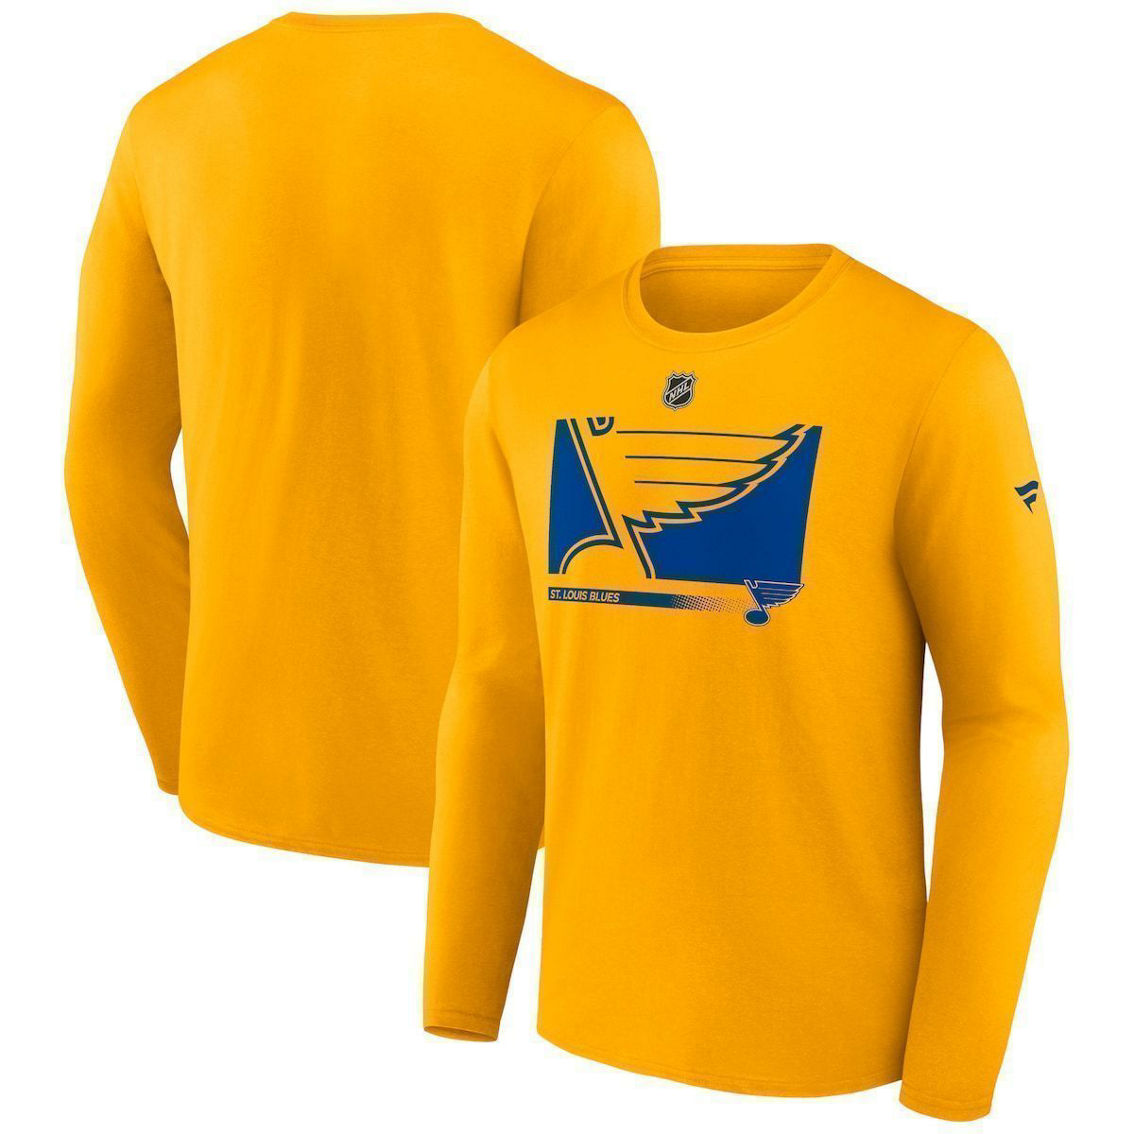 Fanatics Branded Men's Gold St. Louis Blues Authentic Pro Core Collection Secondary Long Sleeve T-Shirt - Image 2 of 4